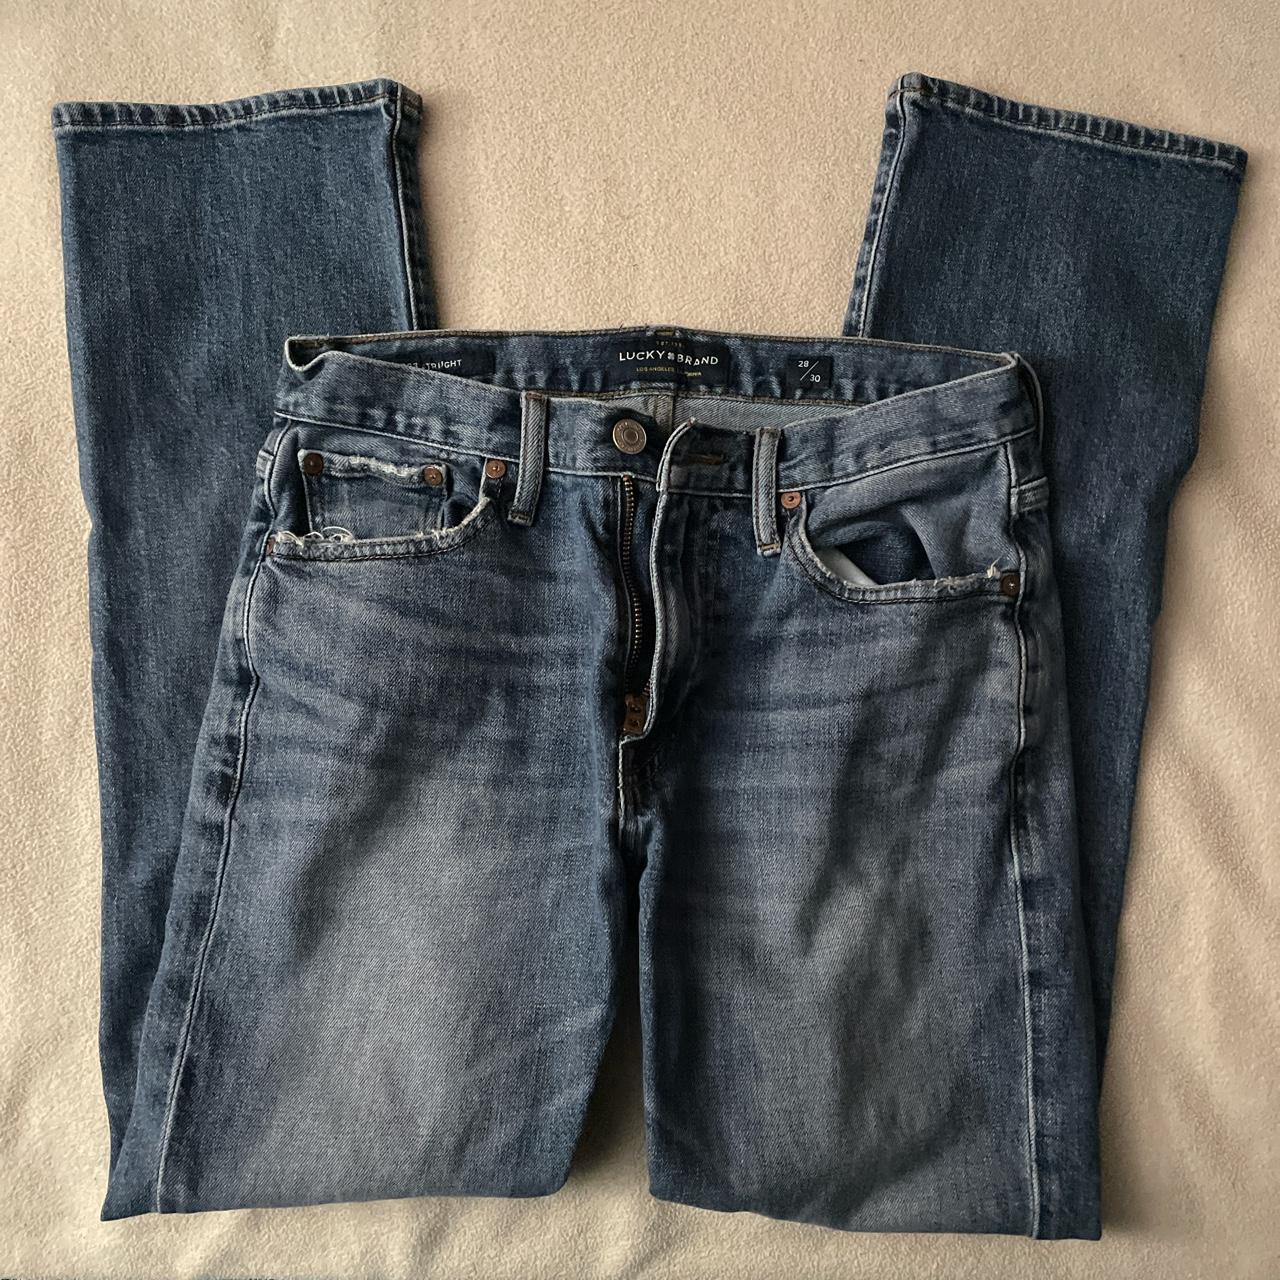 Lucky Brand jeans. Style name 363 straight leg size